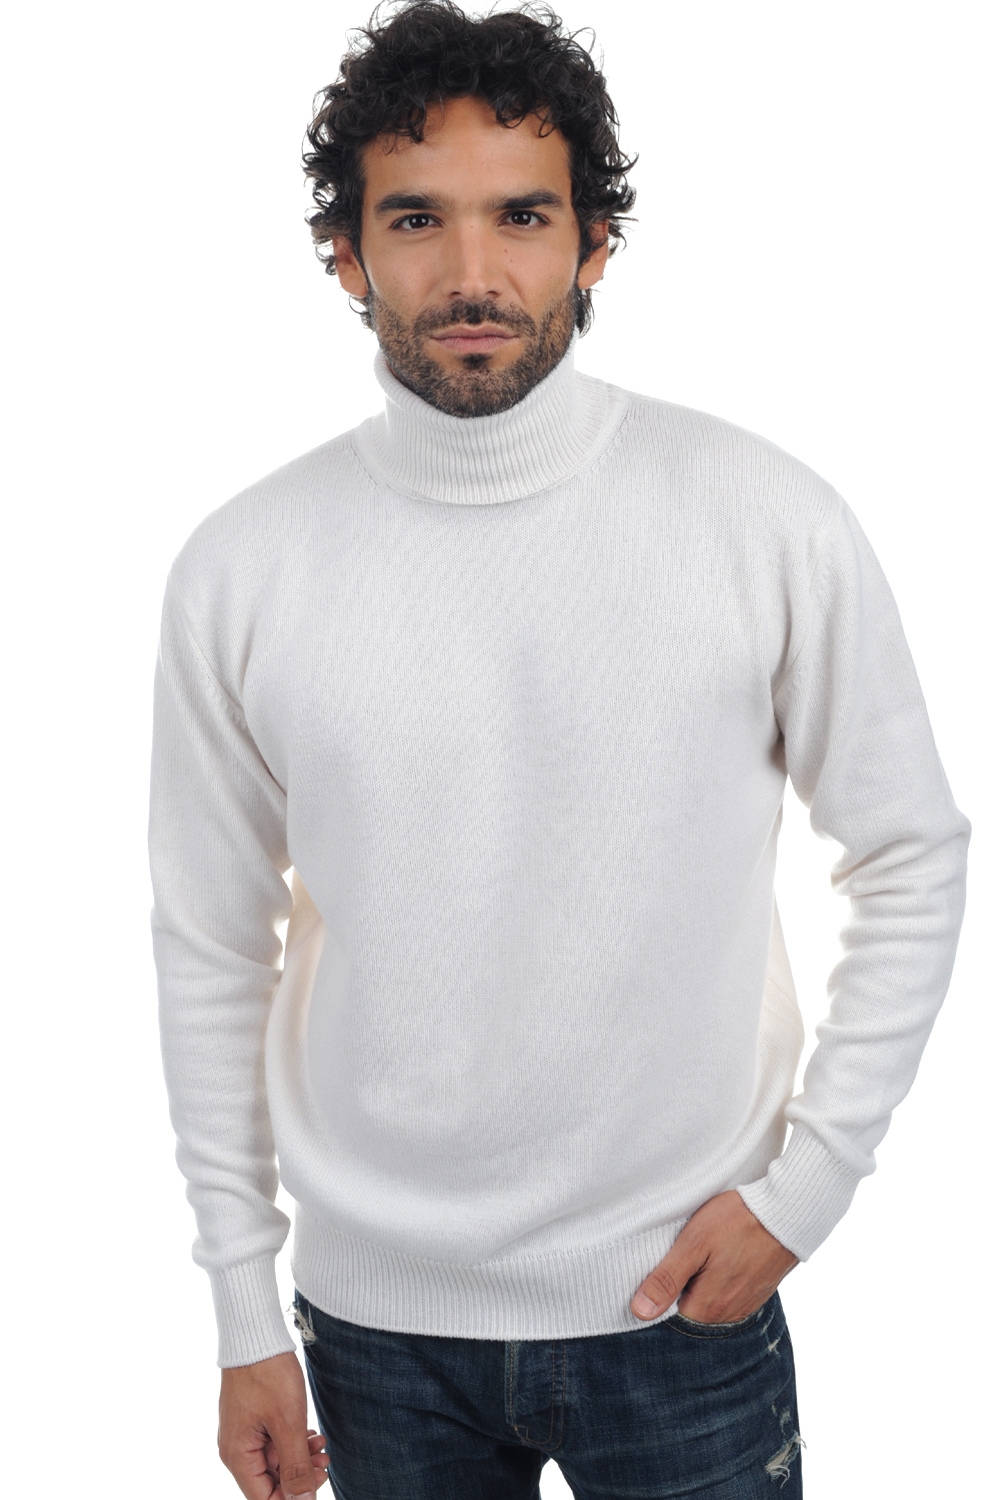 Cachemire pull homme col roule edgar 4f blanc casse 3xl